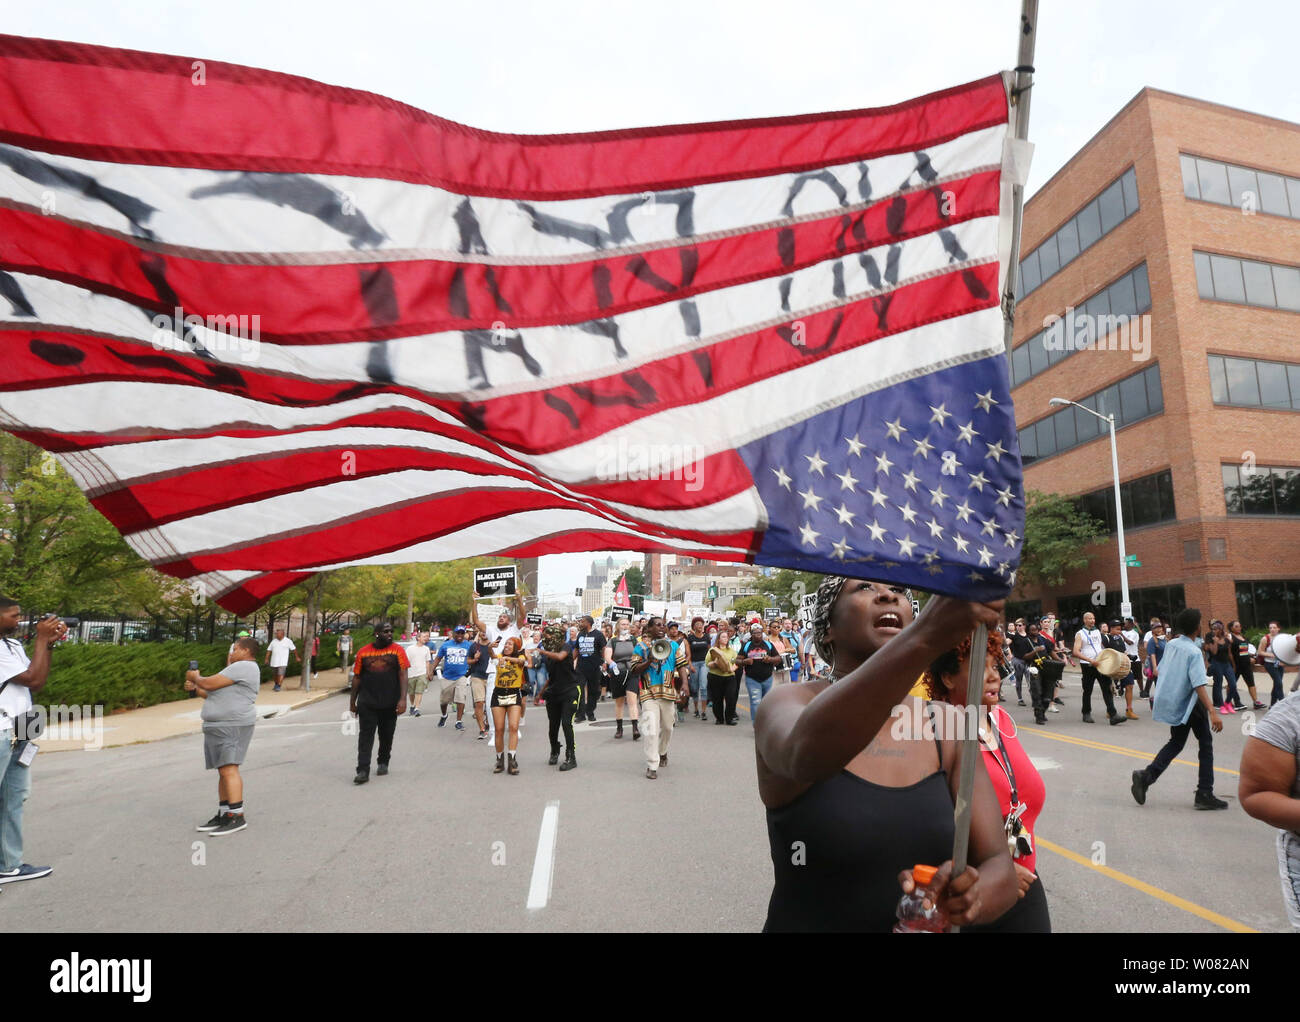 A woman carries an American flag upside down during a peaceful protest outside of St. Louis Metropolitian Police Headquarters in St. Louis on September 17, 2017. A non-guilty verdict of a former white St. Louis policeman in the 2011 shooting of a black man in St. Louis has resulted in two nights of peaceful marching eventually turning violent. Jason Stockley was acquitted of first degree murder charges in the fatal shooting of Anthony Lamar Smith on Dec. 11, 2011 following a high-speed chase. Police have made nearly 50 arrests while a score of businesses have suffered broken windows.   Photo b Stock Photo